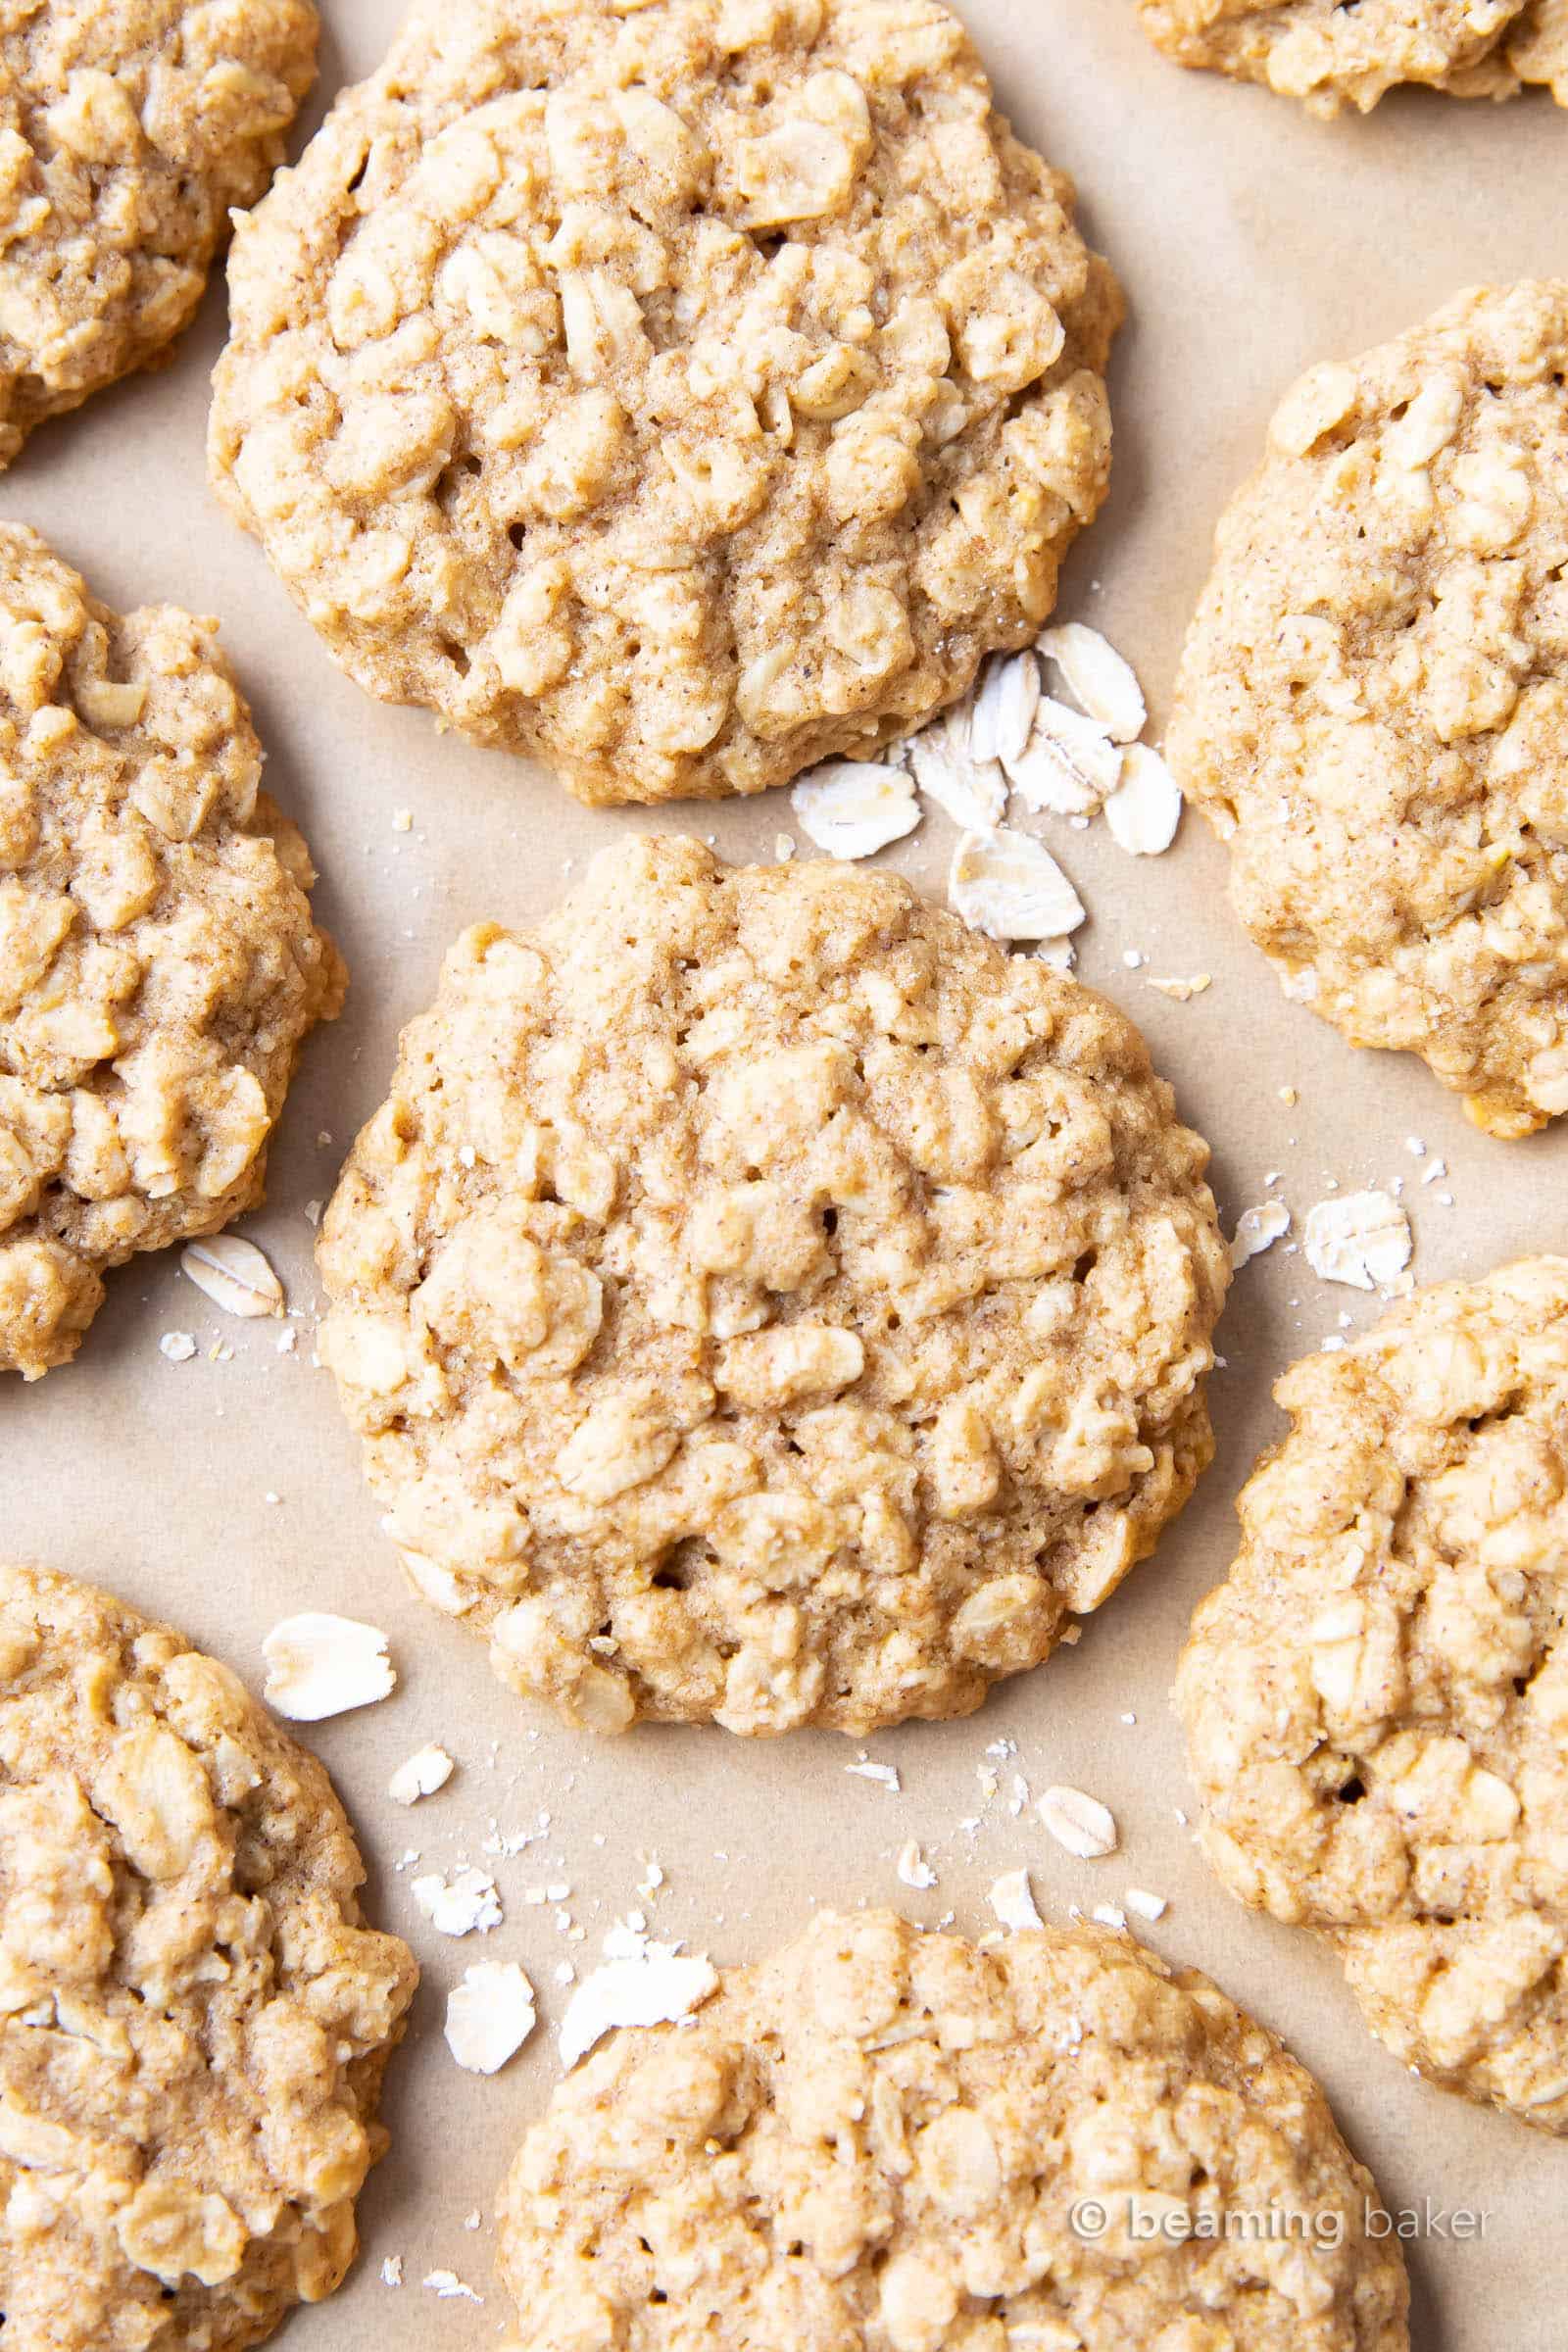 Freshly baked healthy oatmeal cookies on brown parchment paper